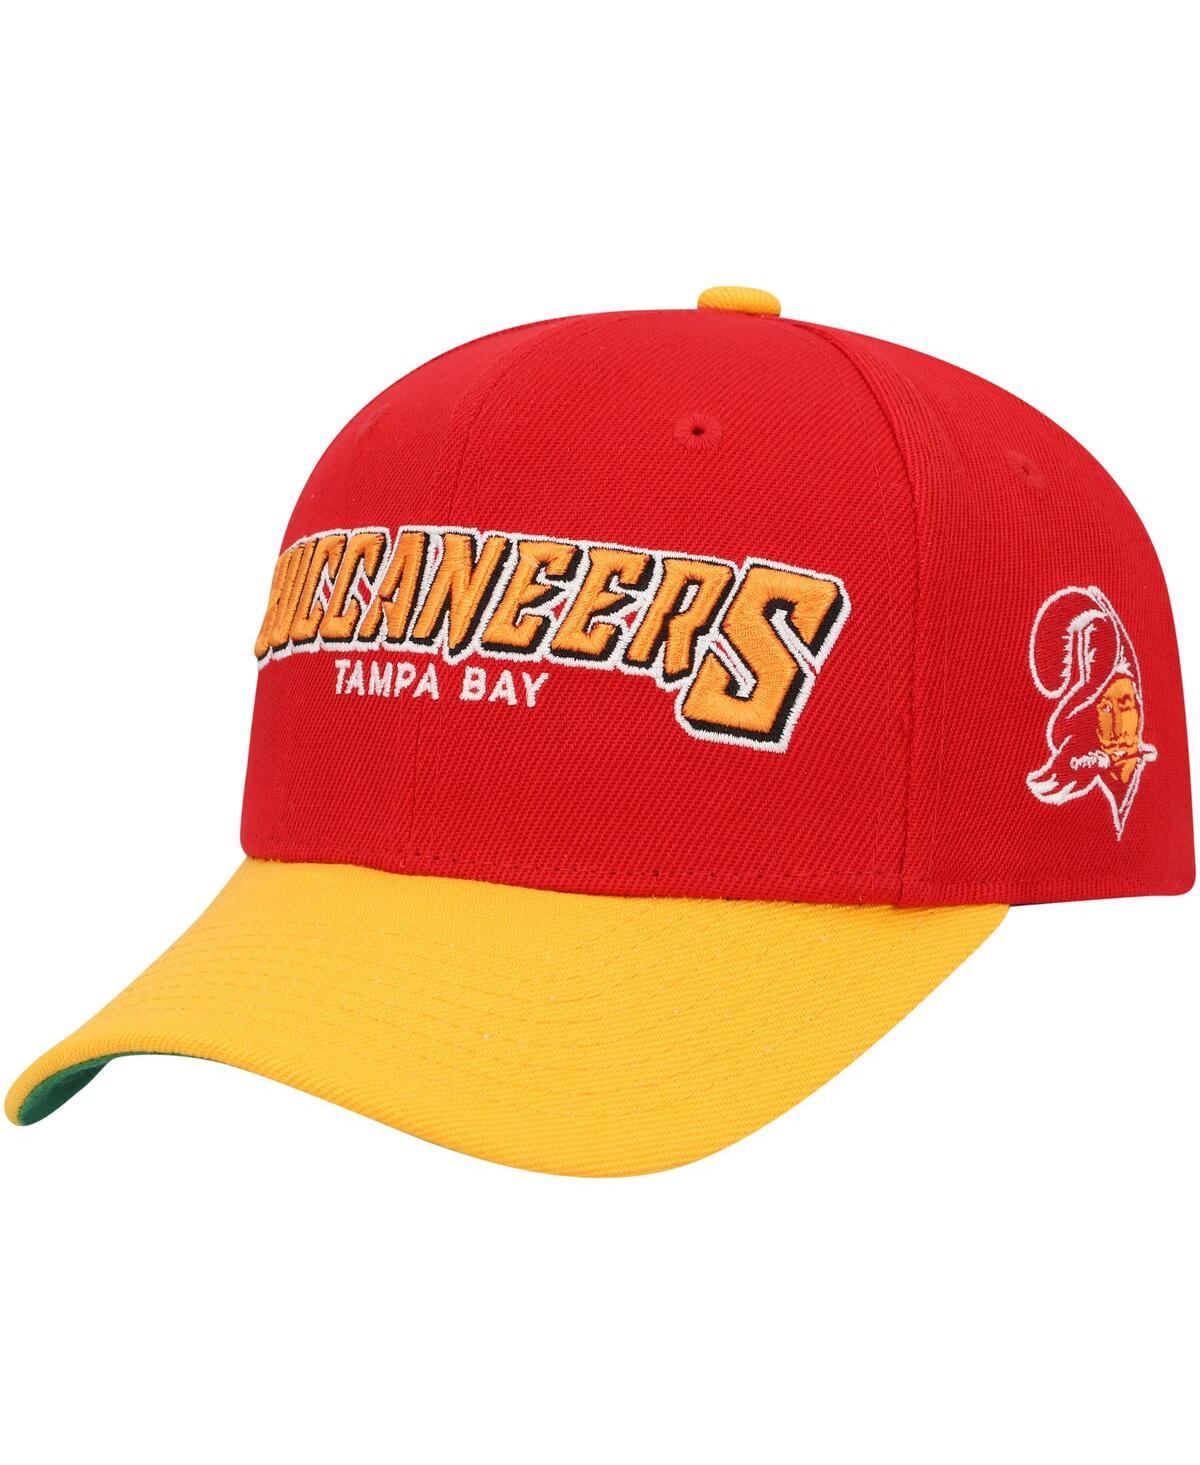 Mitchell & Ness Kids' Big Boys And Girls  Red, Yellow Tampa Bay Buccaneers Shredder Adjustable Hat In Red,yellow